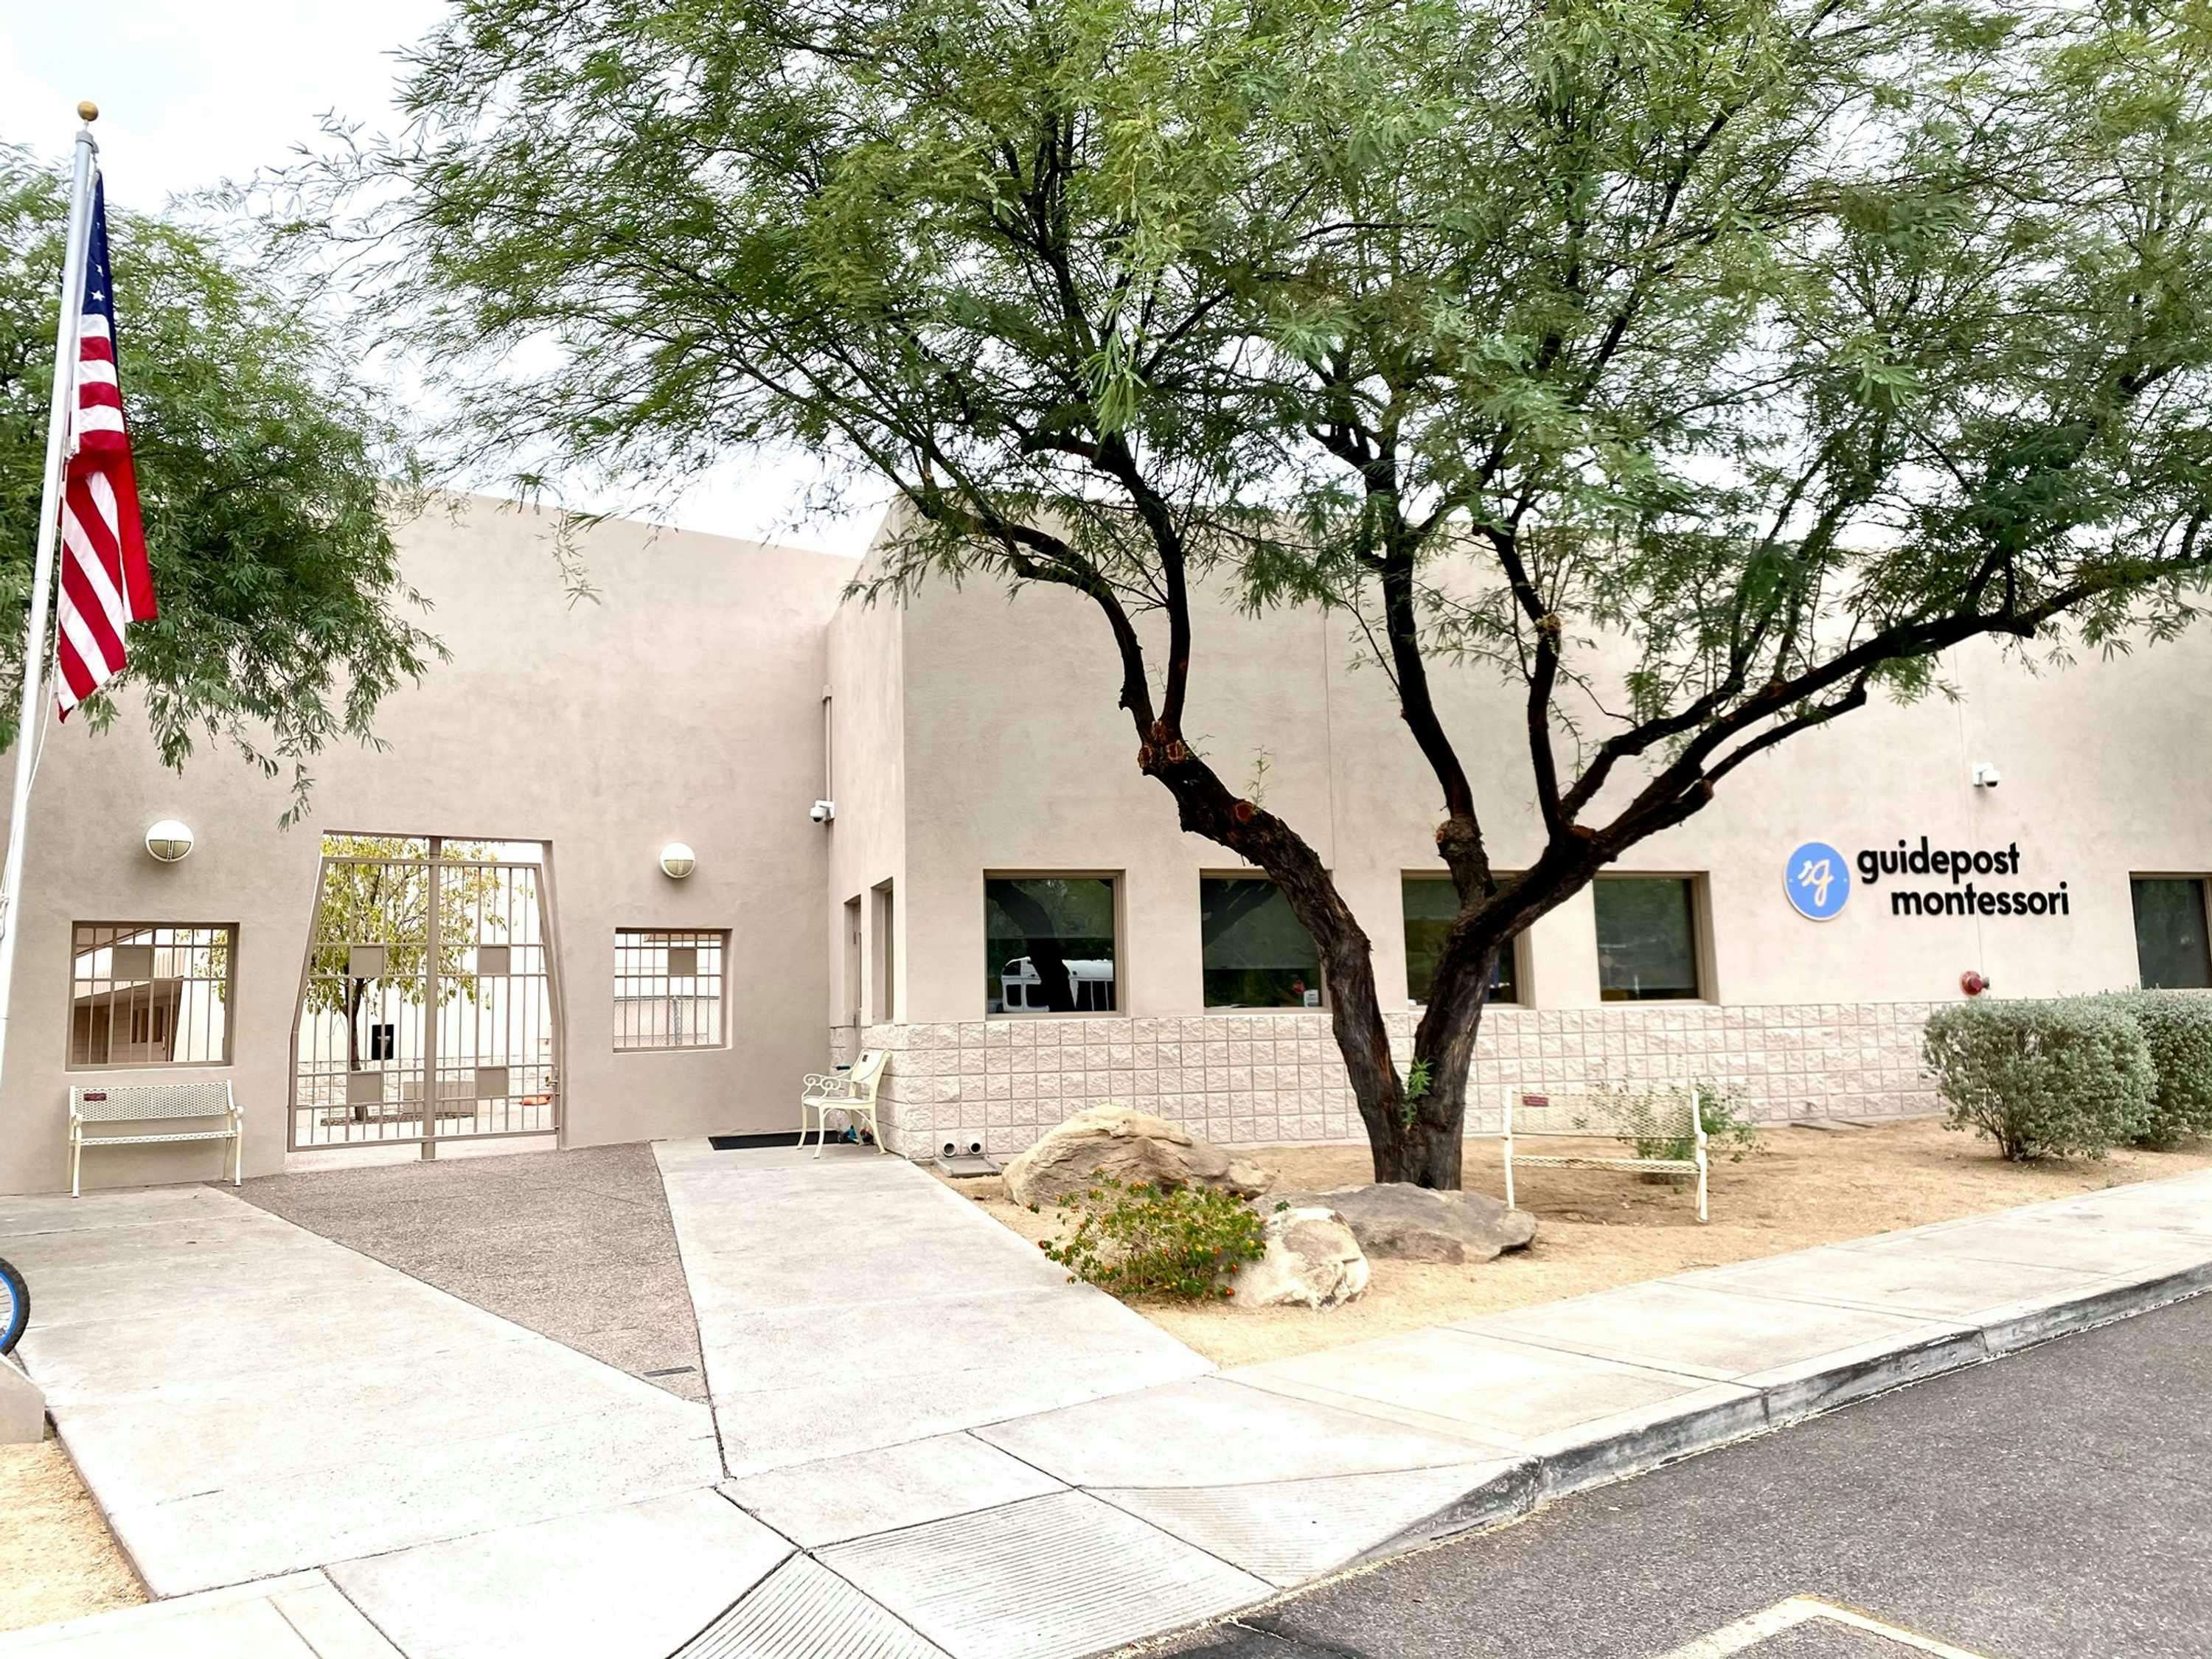 View of Guidepost Montessori at North Scottsdale from the parking lot that shows the entrance gate and a tree in front of four windows with a Guidepost Montessori branded sign on the right facade of the building.